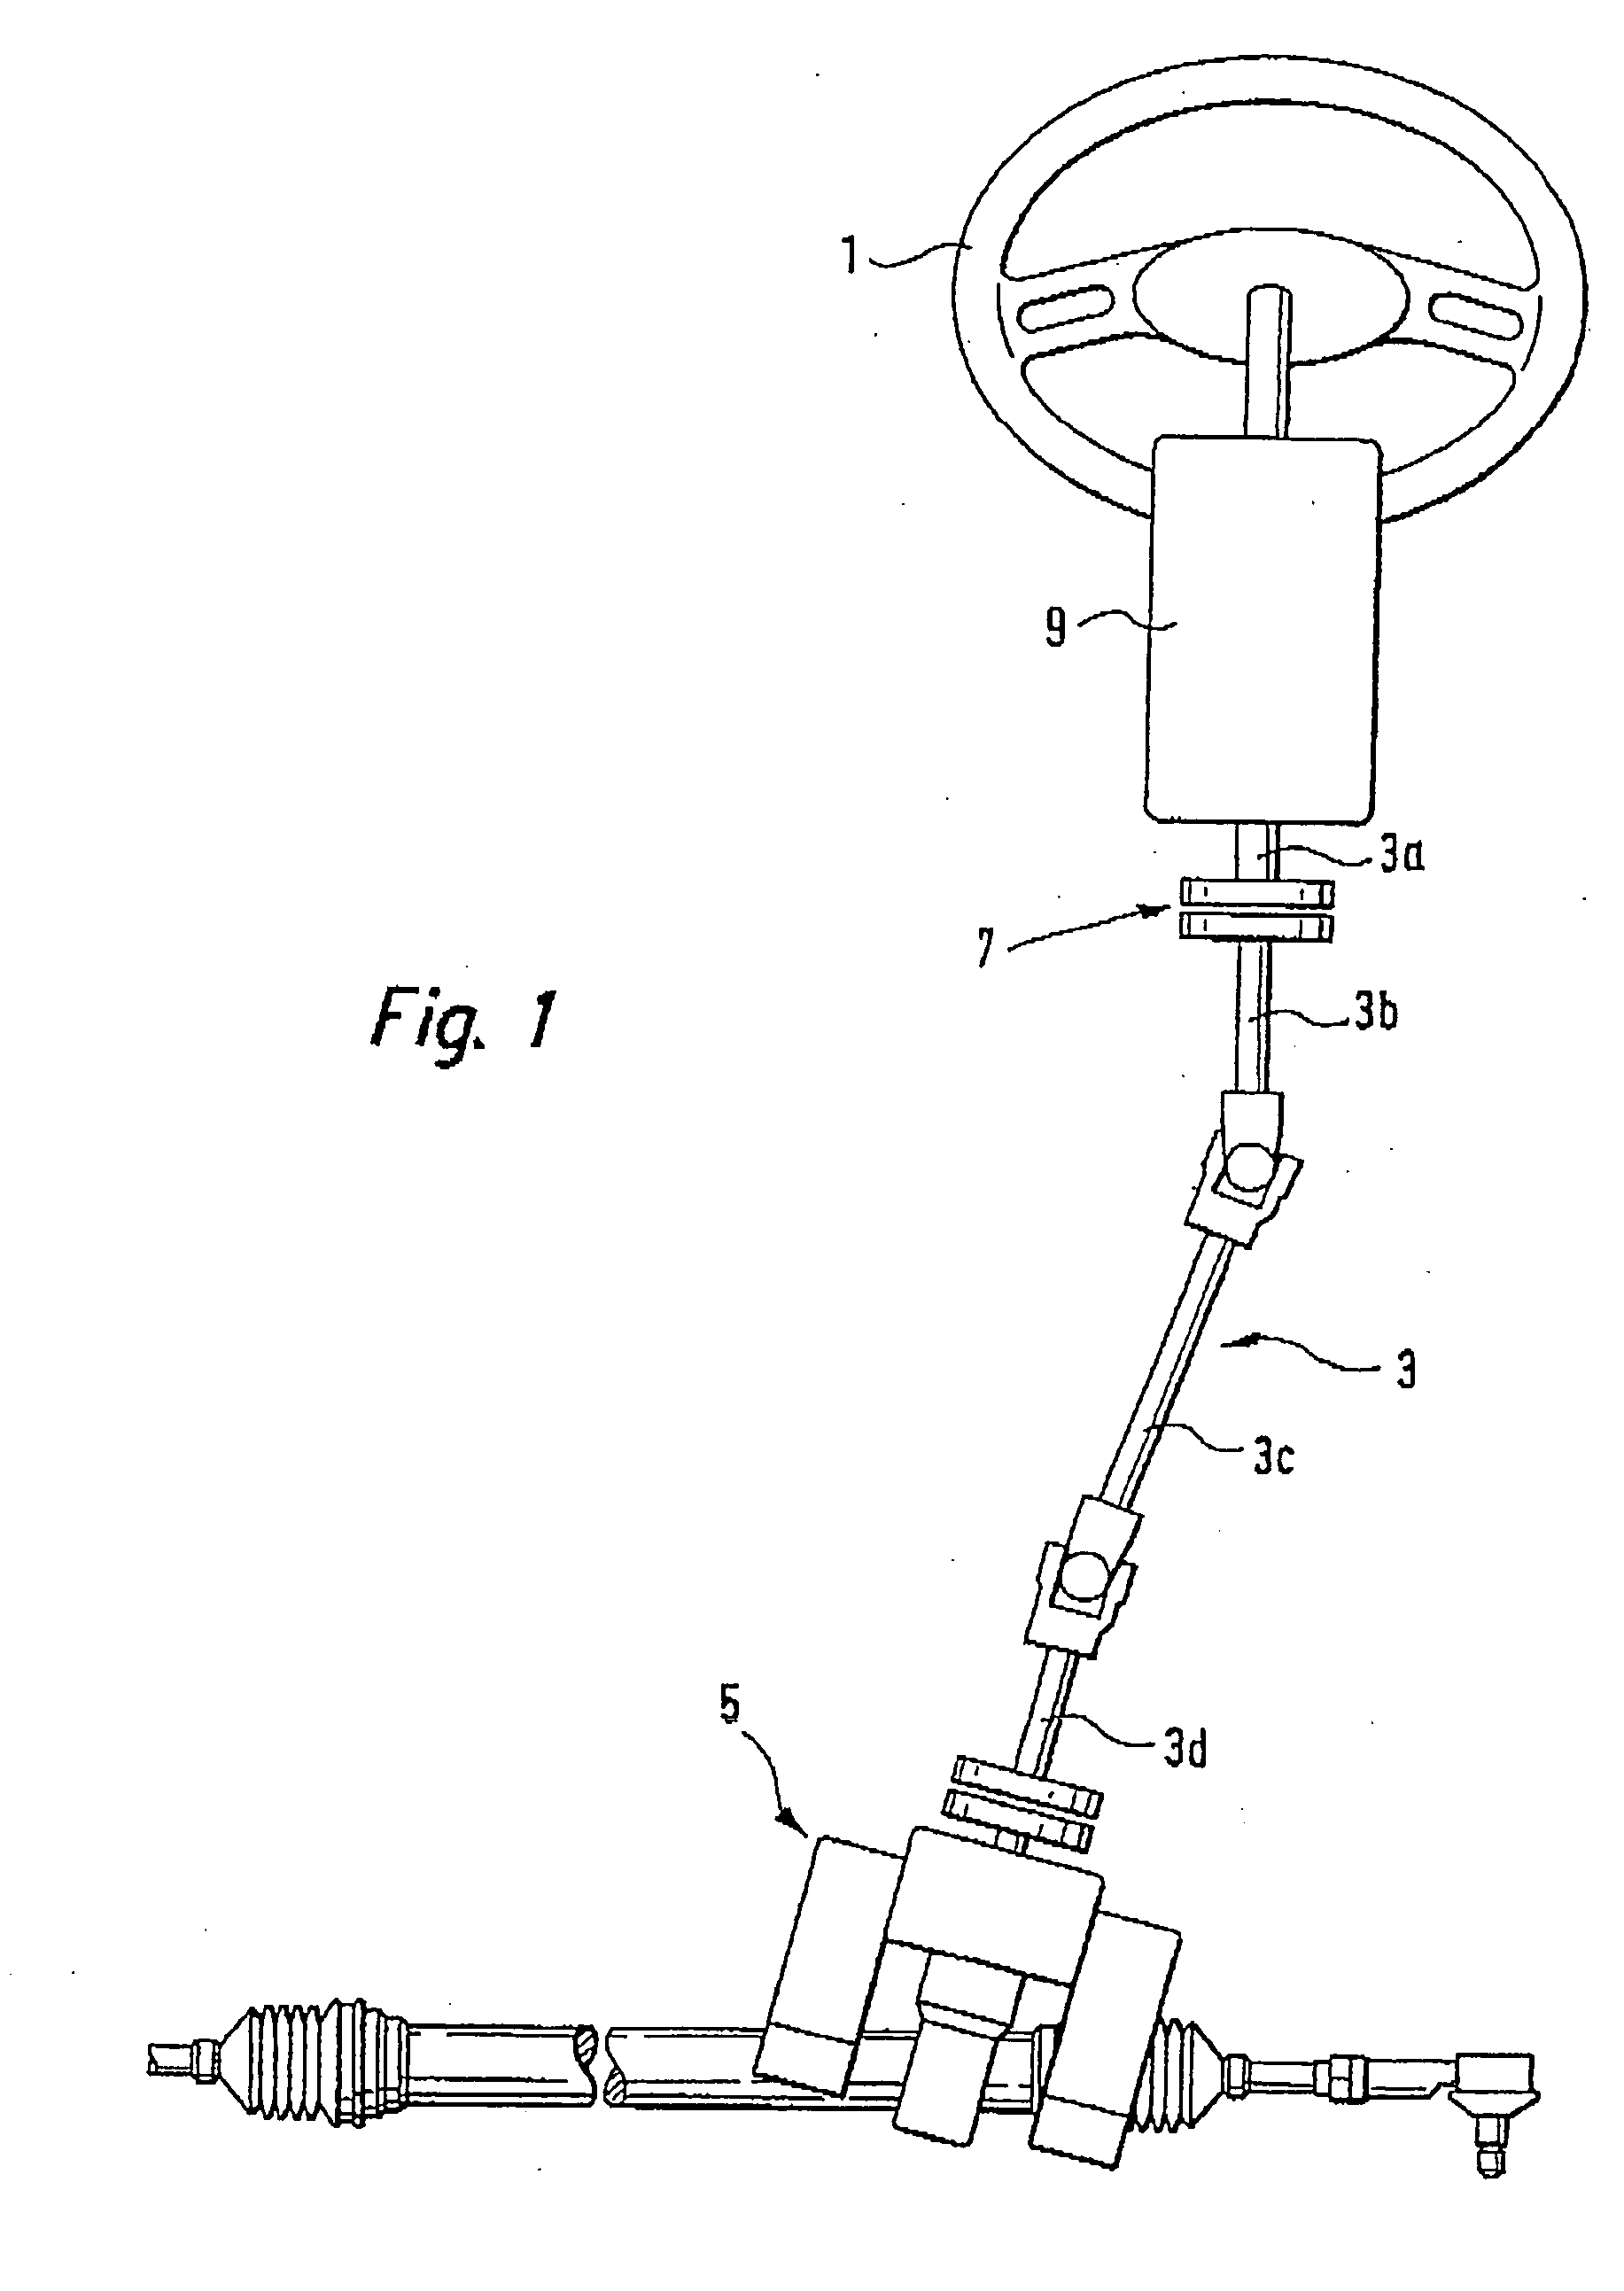 Clutch for steer-by-wire steering system